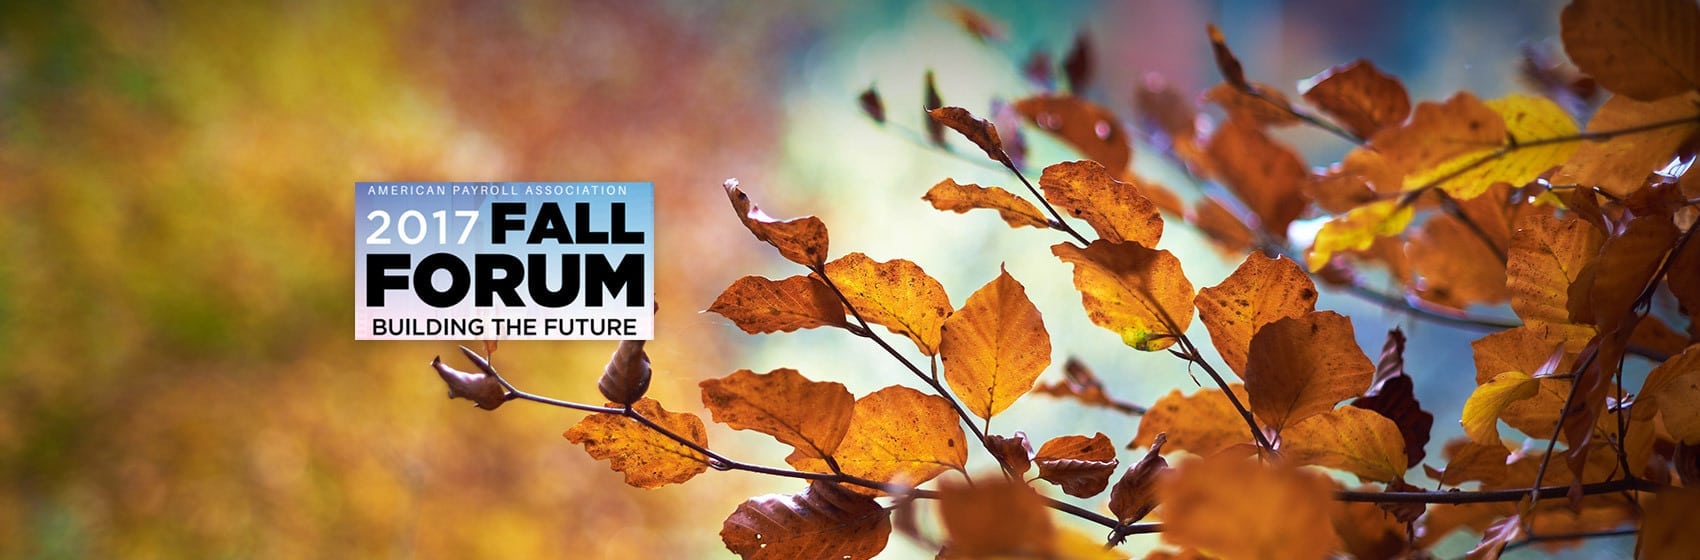 Autumn Leaves and fall forum